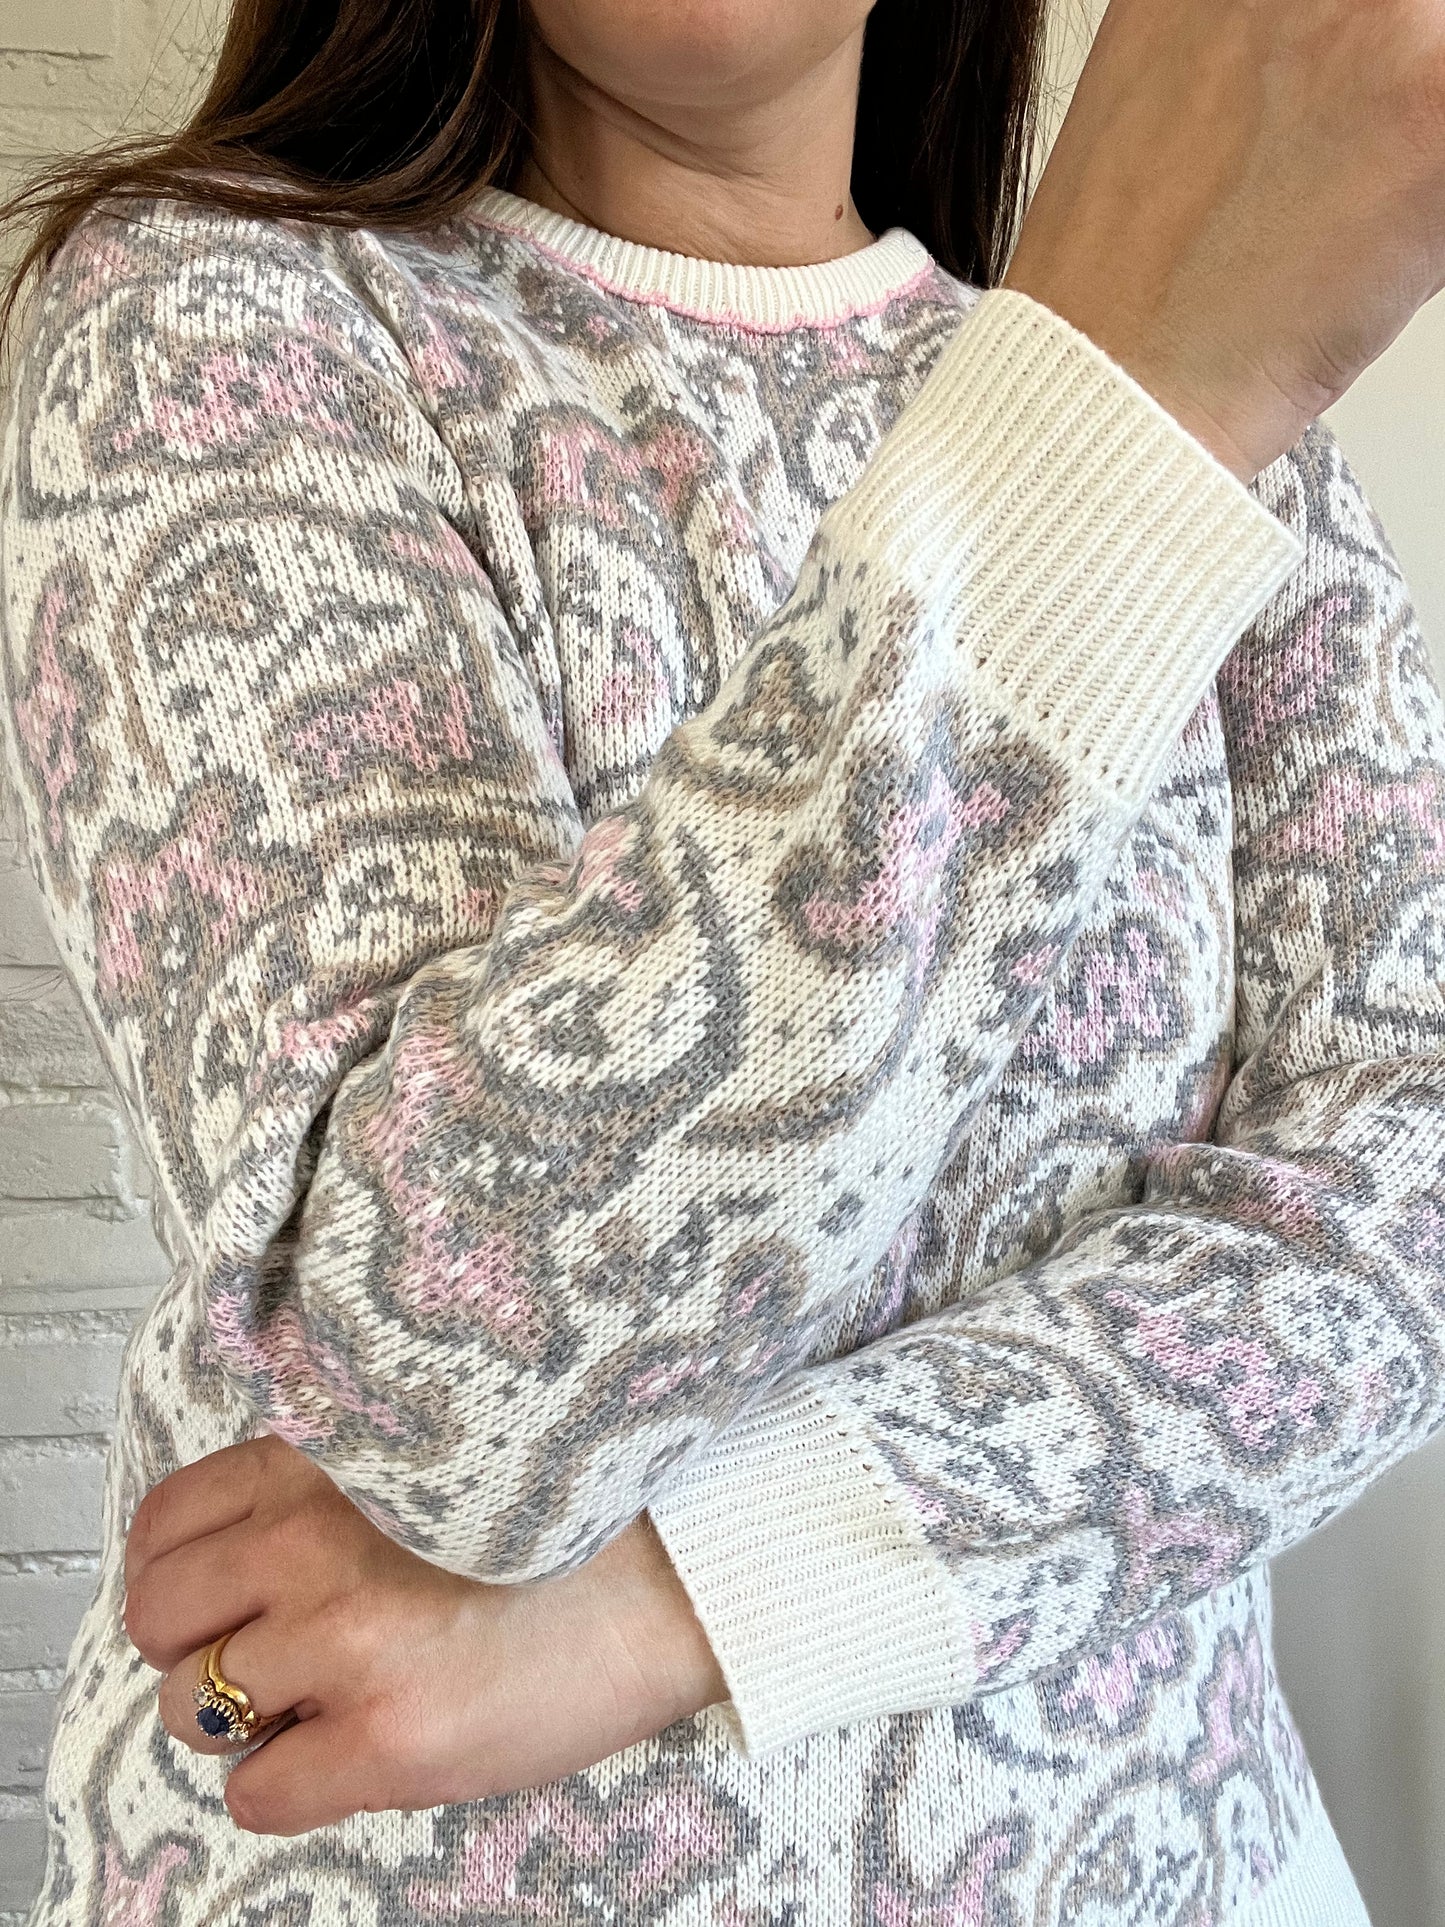 Creamy Floral Knit Sweater - Size M